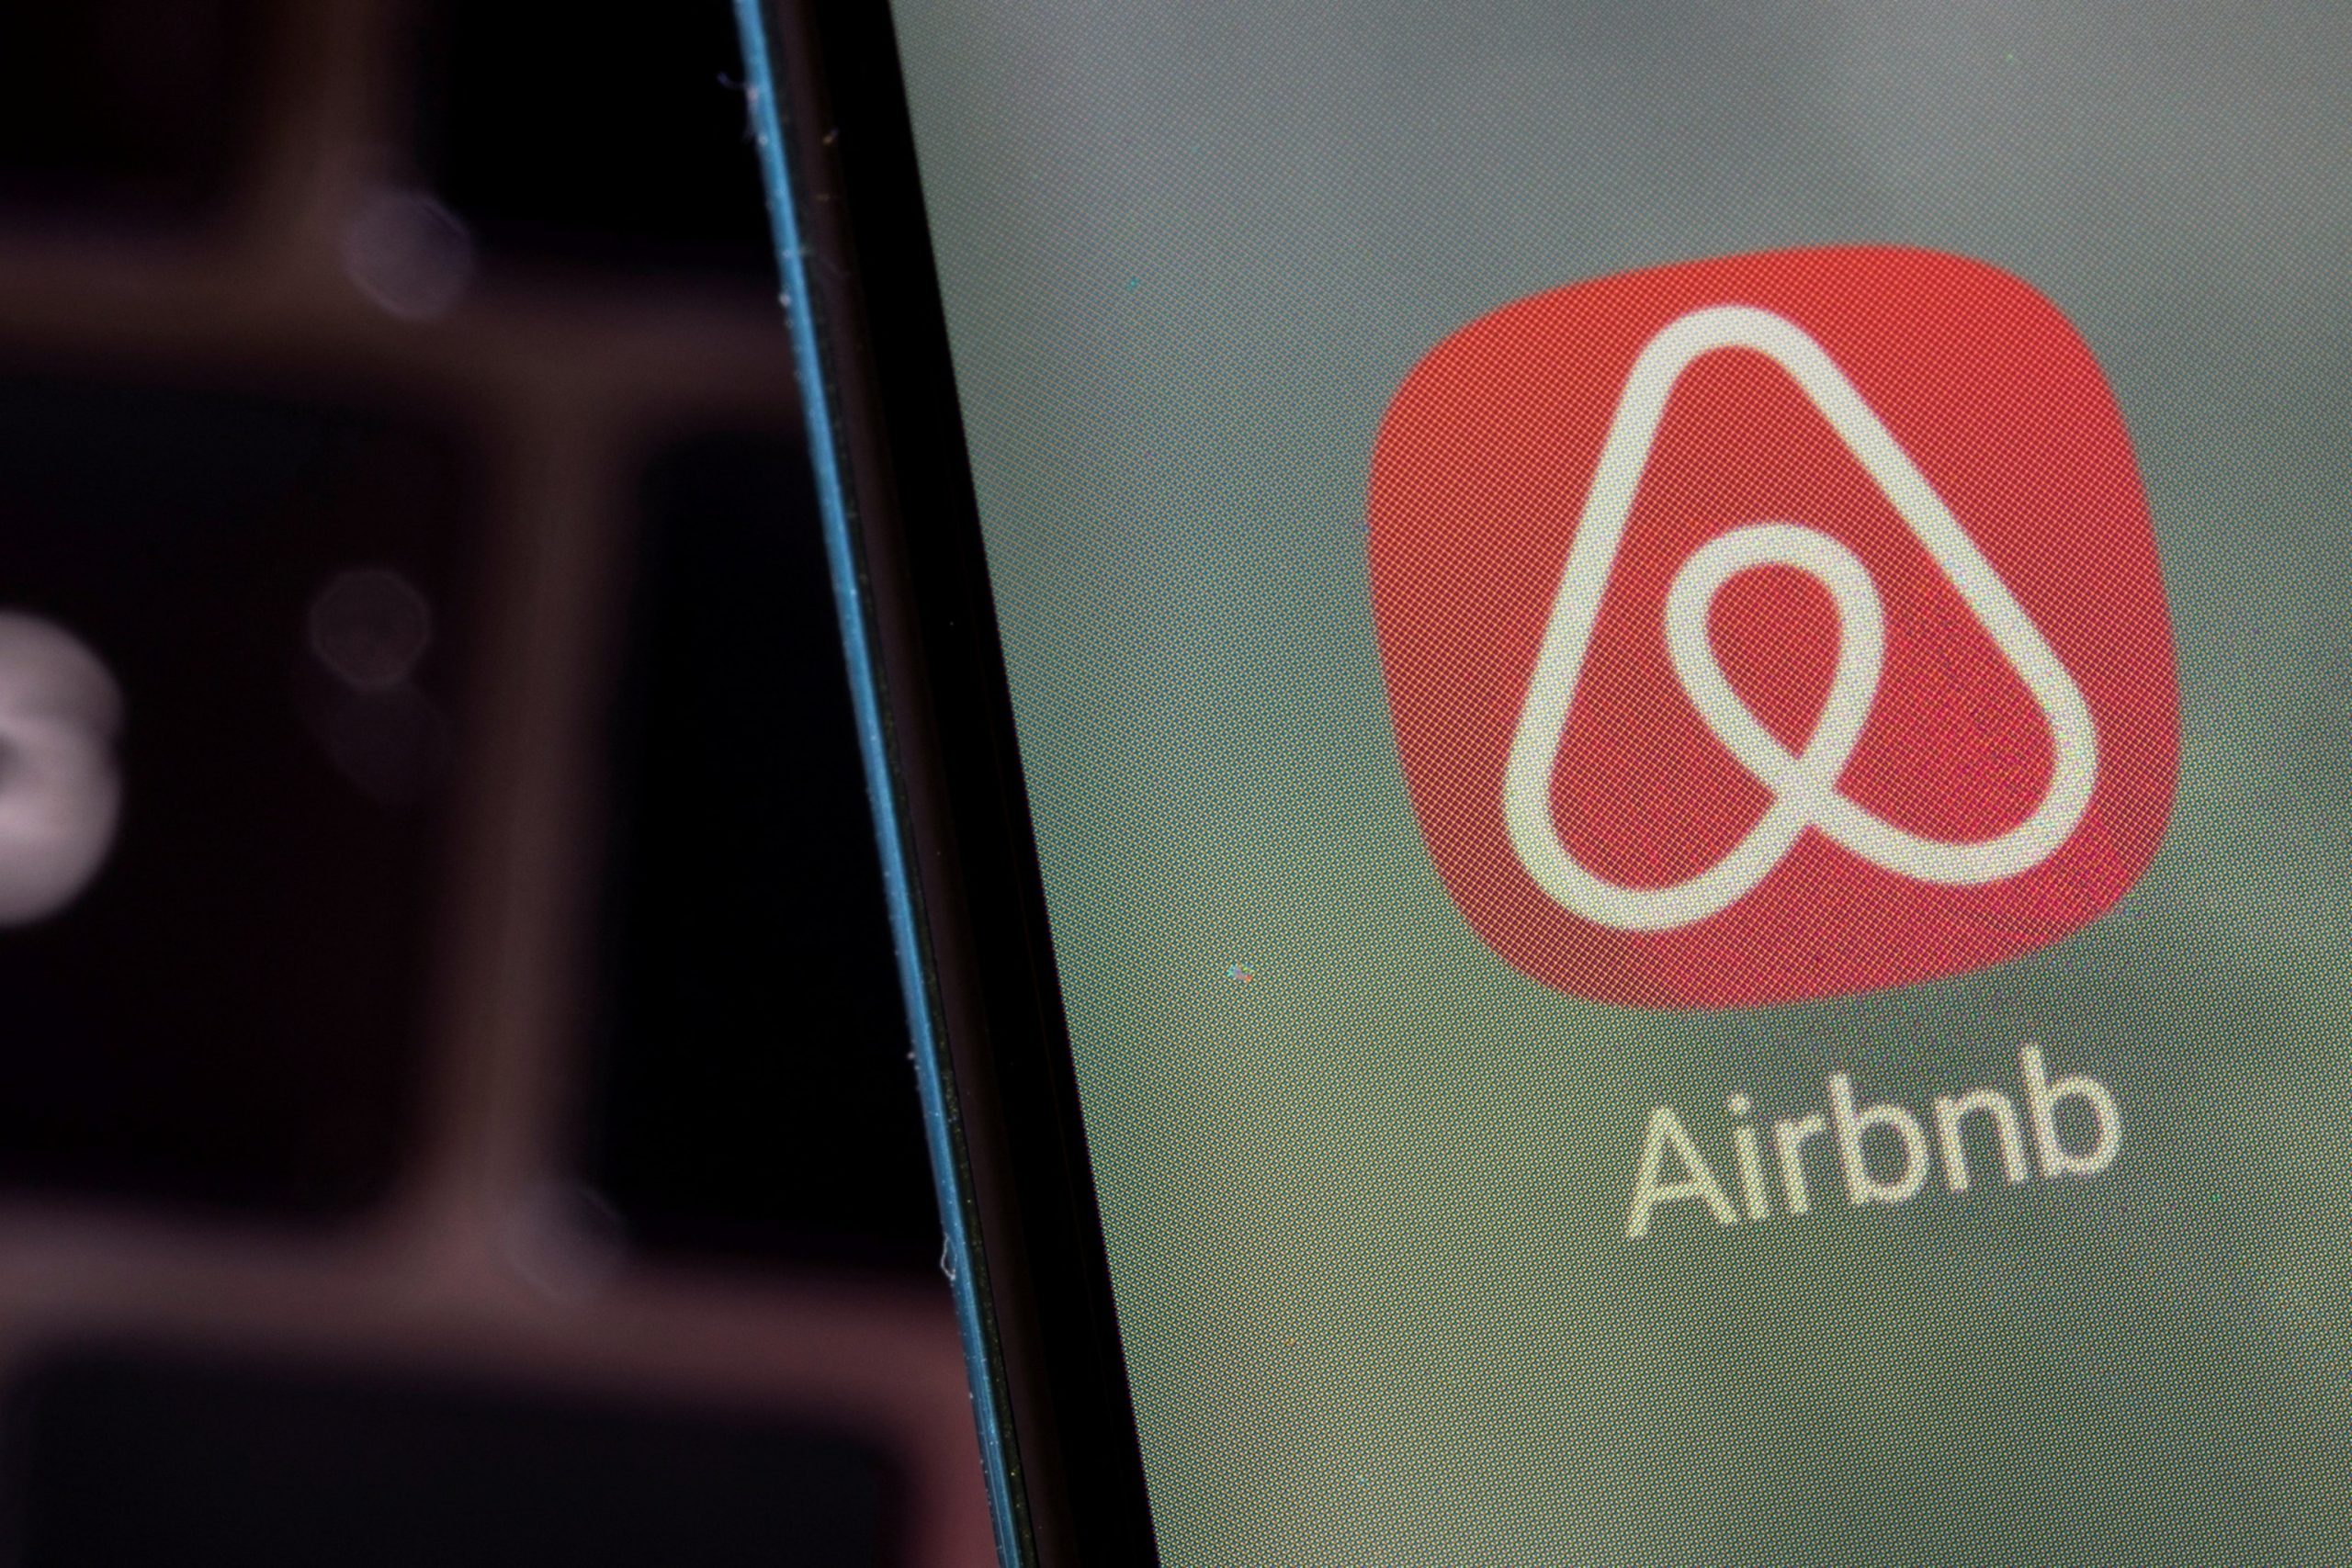 Airbnb prohibits the use of indoor security cameras in all properties